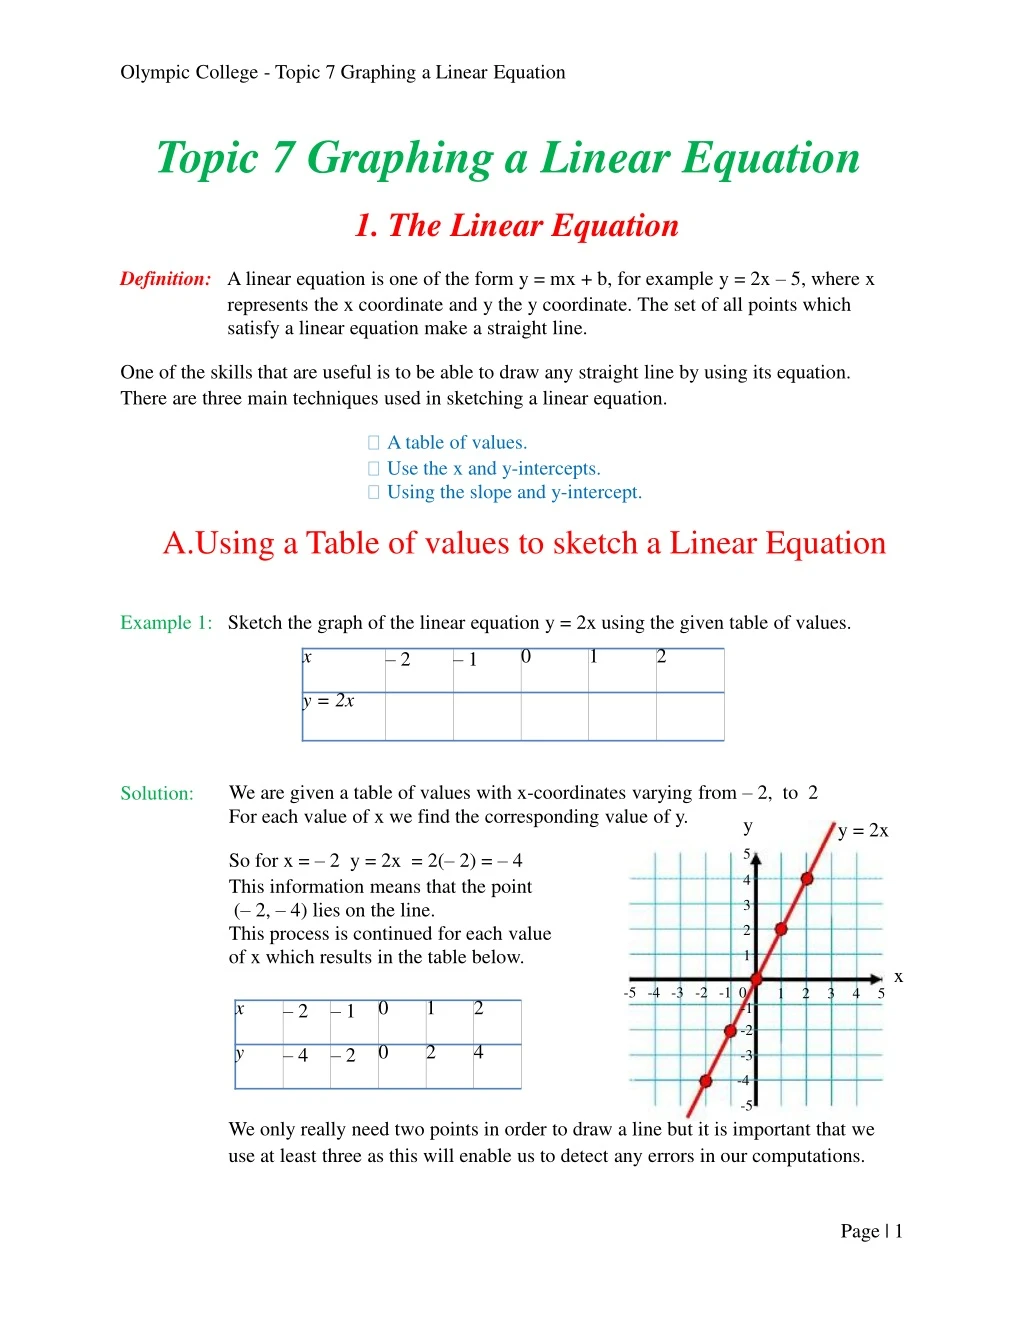 olympic college topic 7 graphing a linear